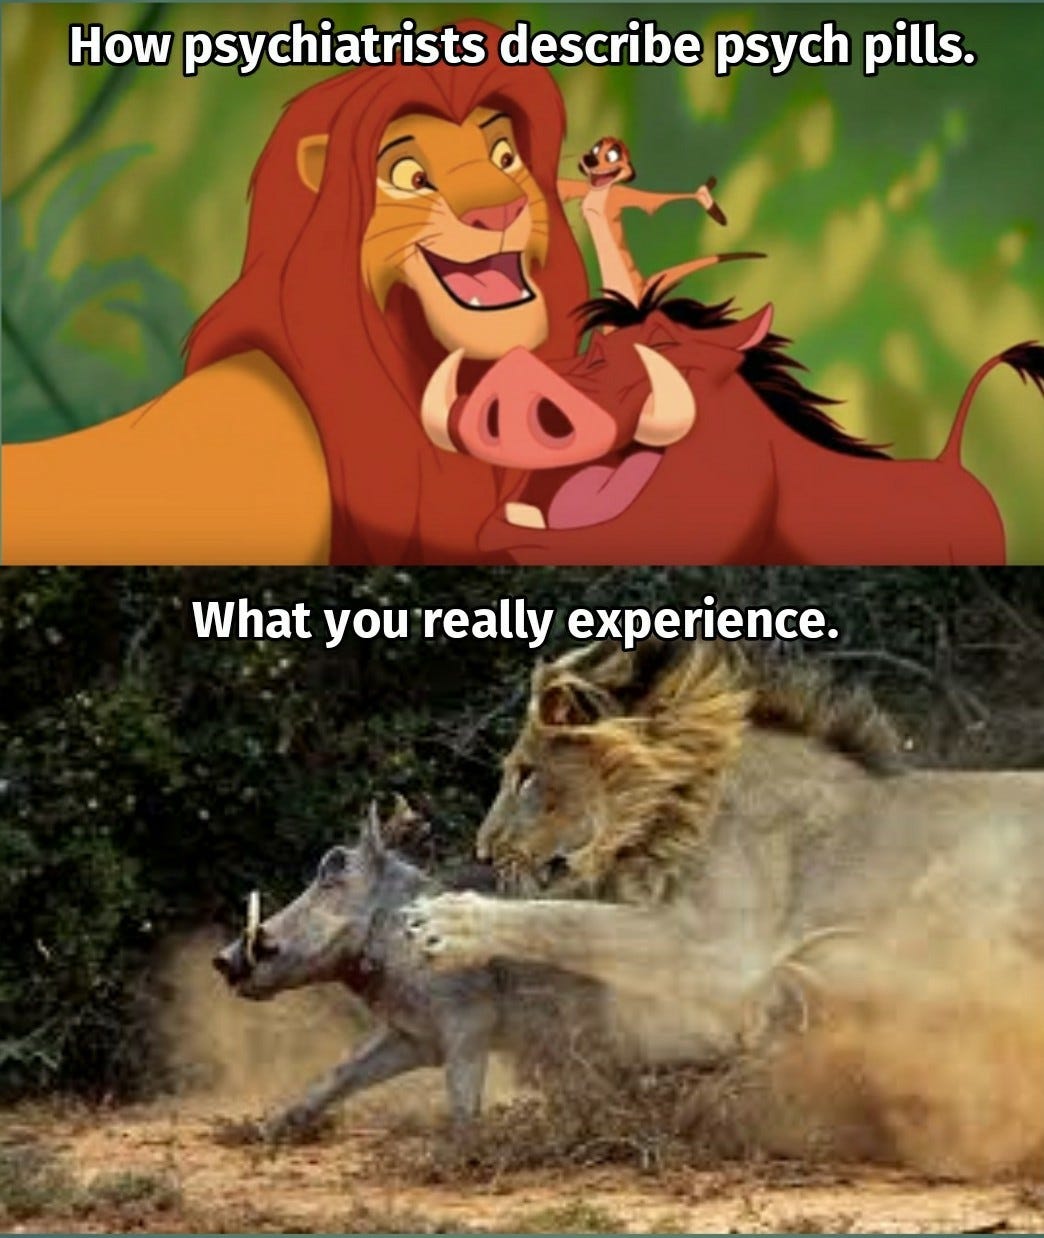 A scene from the movie, the Lion King labeled "How psychiatrist describe psych pills" and a scene of a lion hunting a boar labeled "What you really experience."